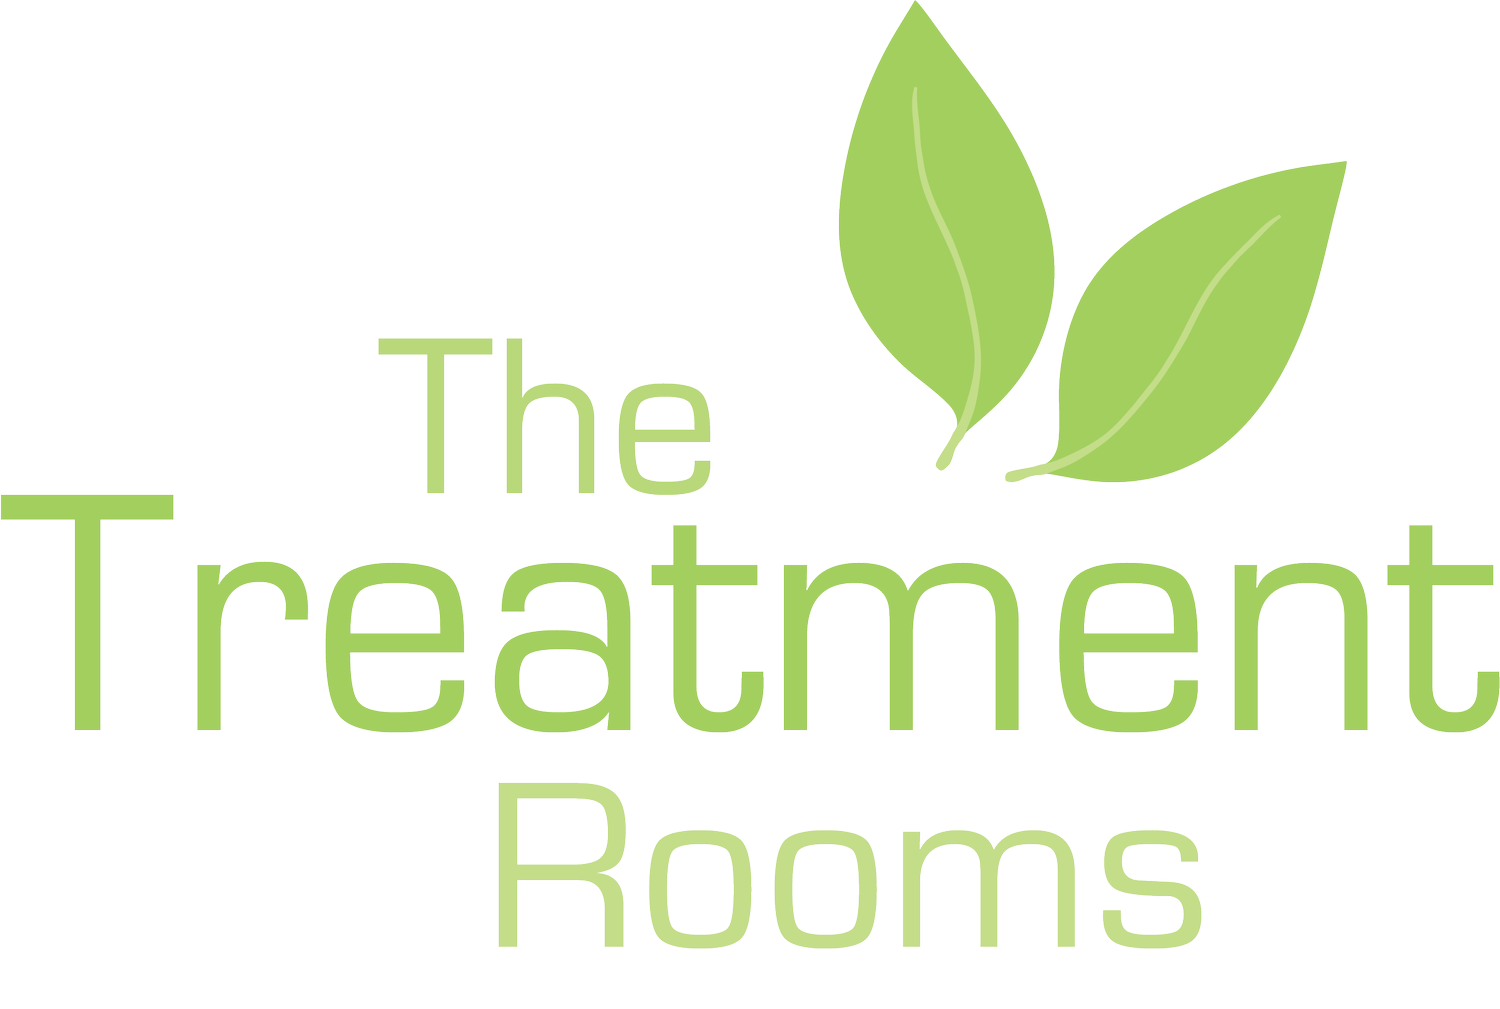 The Treatment Rooms